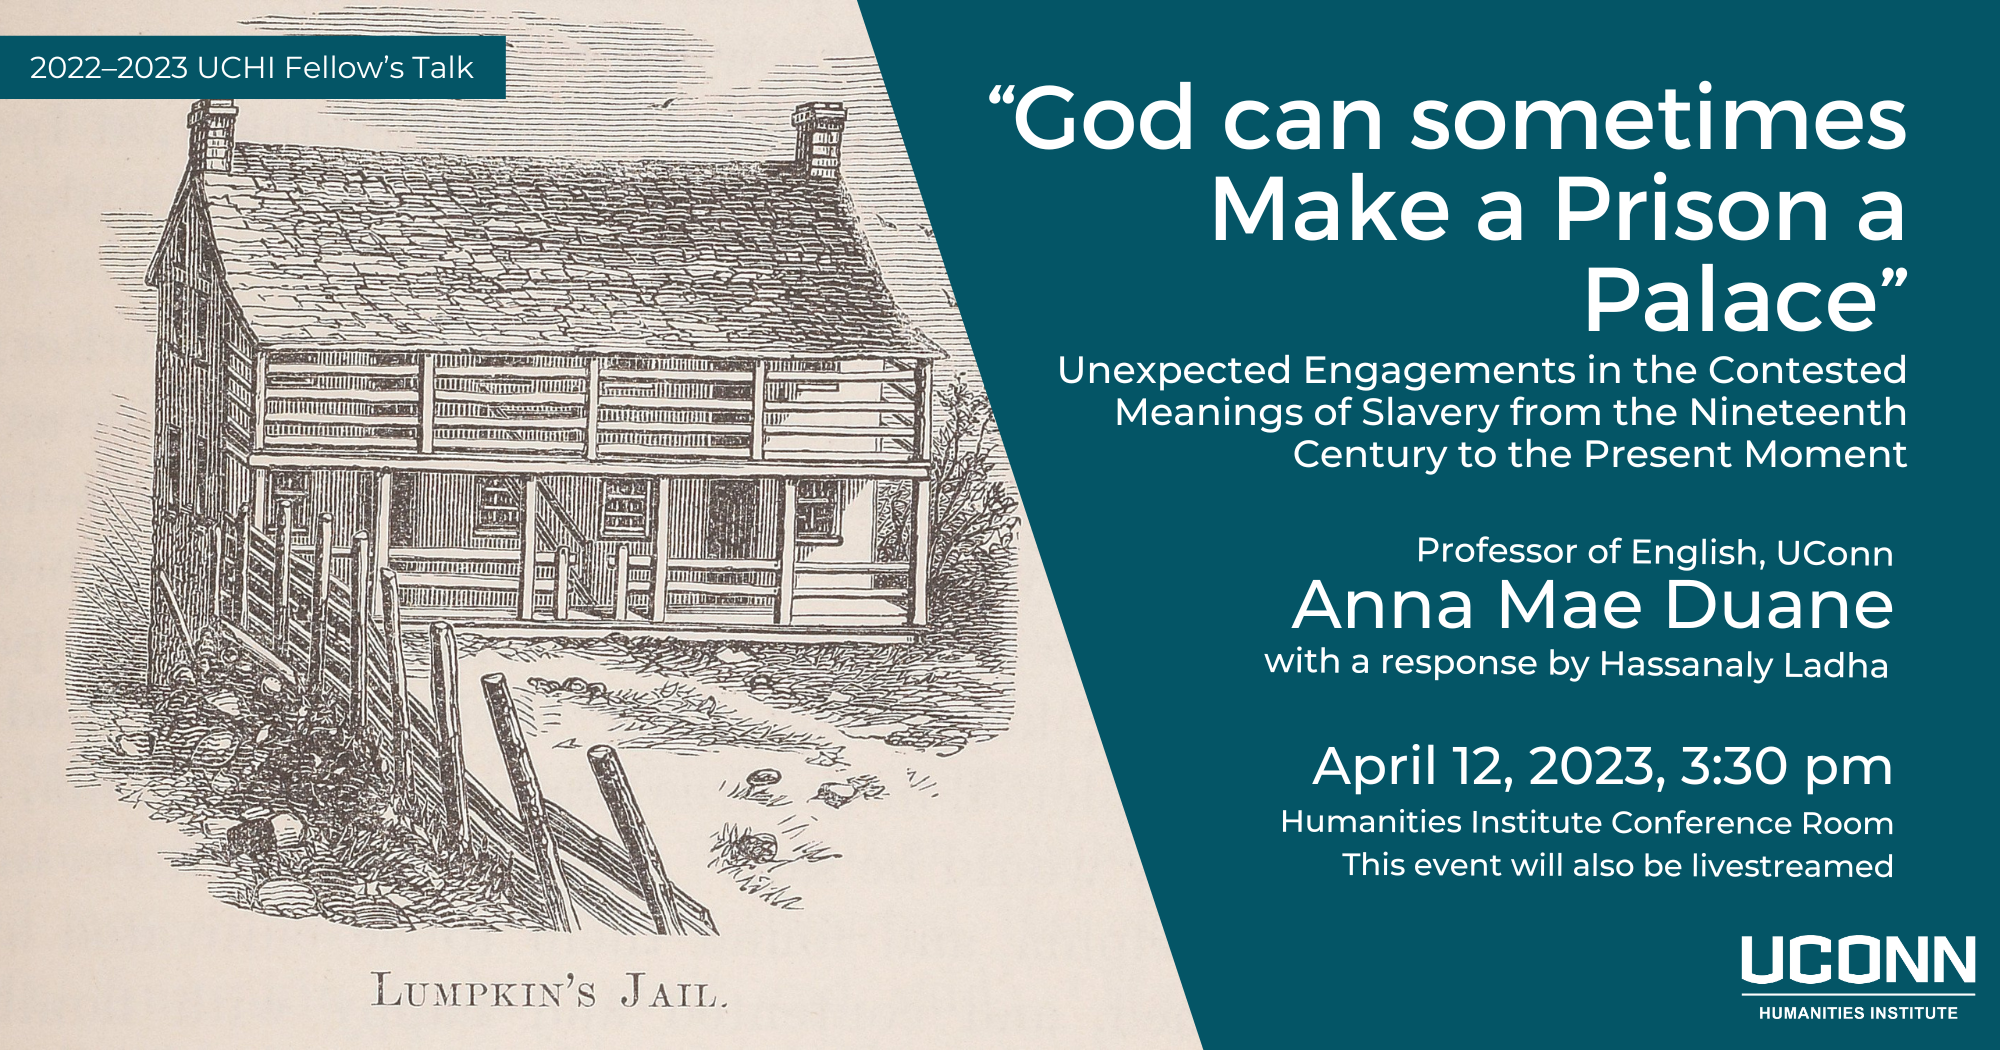 2022–23 Fellow's Talk. “God can sometimes Make a Prison a Palace:” Unexpected Engagements in the Contested Meanings of Slavery from the Nineteenth Century to the Present Moment. Professor of English, UConn, Anna Mae Duane, with a response by Hassanaly Ladha. Wednesday April 12, 3:30pm. UCHI Conference Room, Homer Babbidge Library. This event will also be livestreamed.